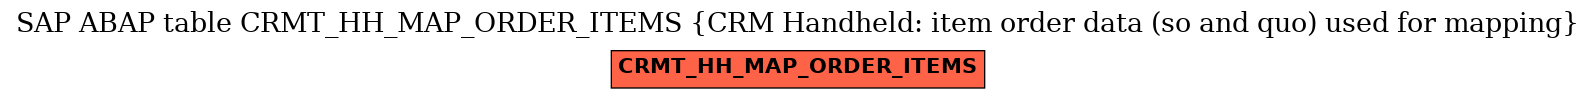 E-R Diagram for table CRMT_HH_MAP_ORDER_ITEMS (CRM Handheld: item order data (so and quo) used for mapping)